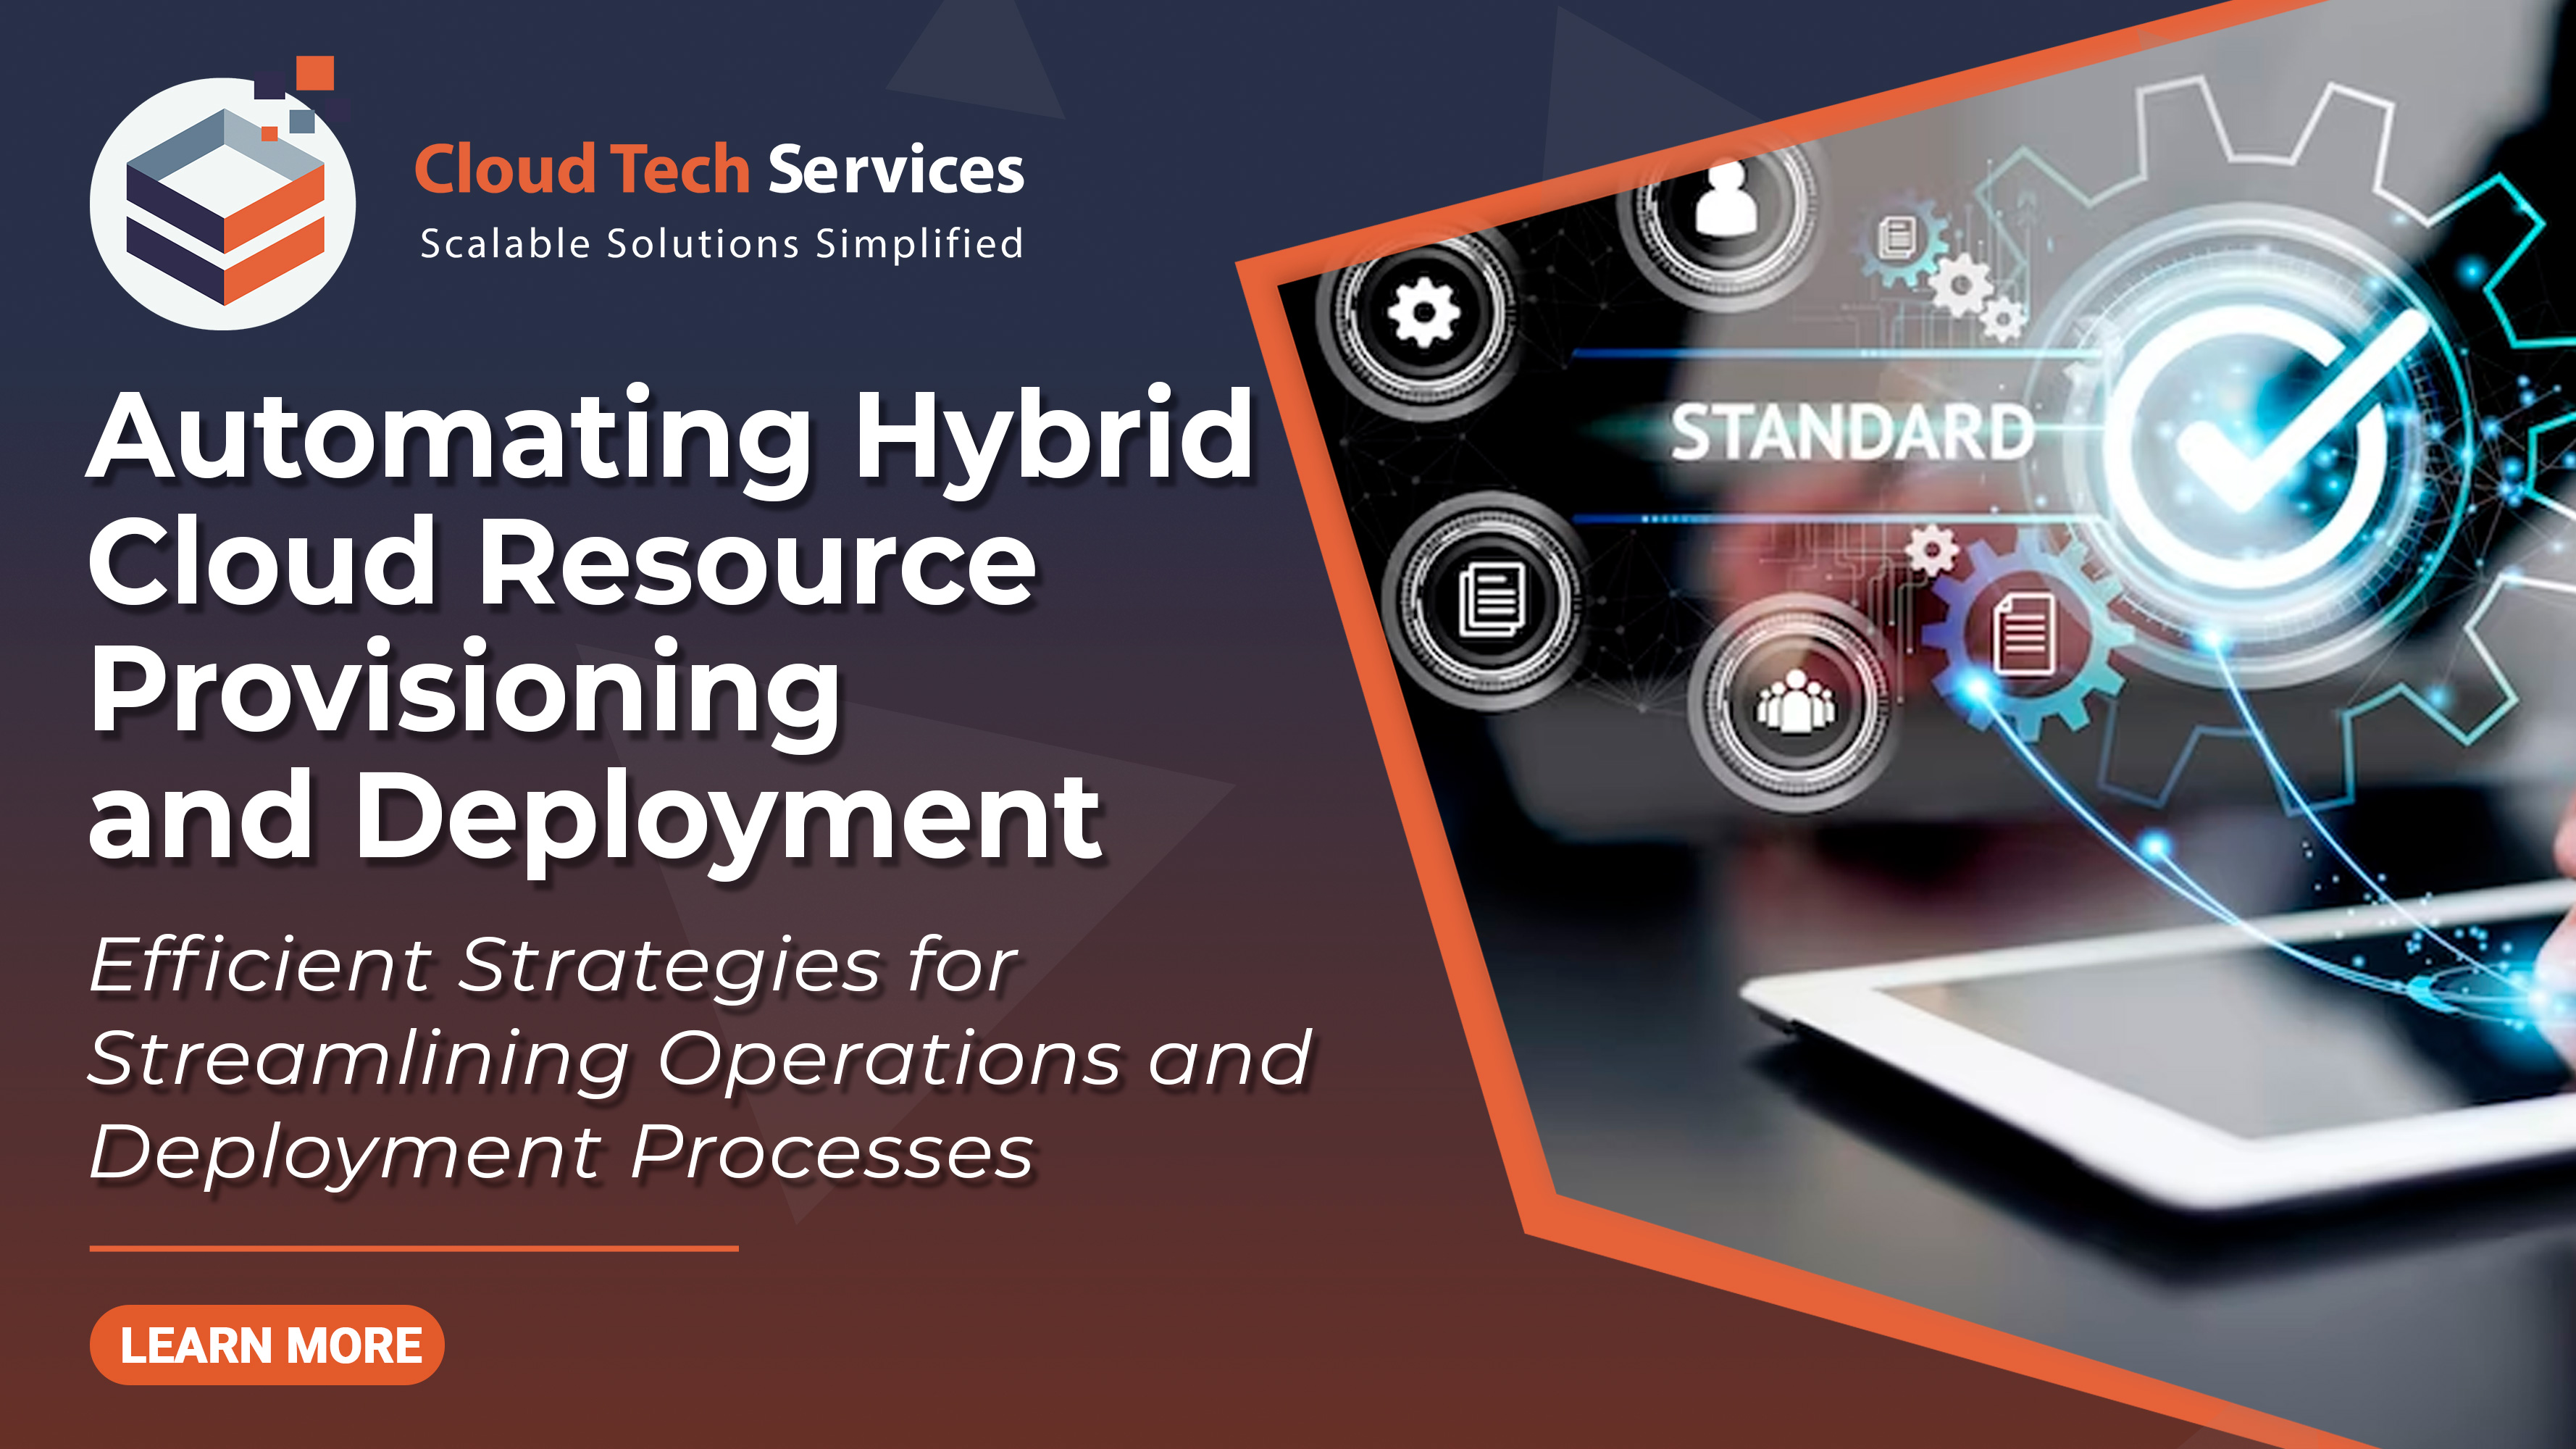 Automating Hybrid Cloud Resource Provision